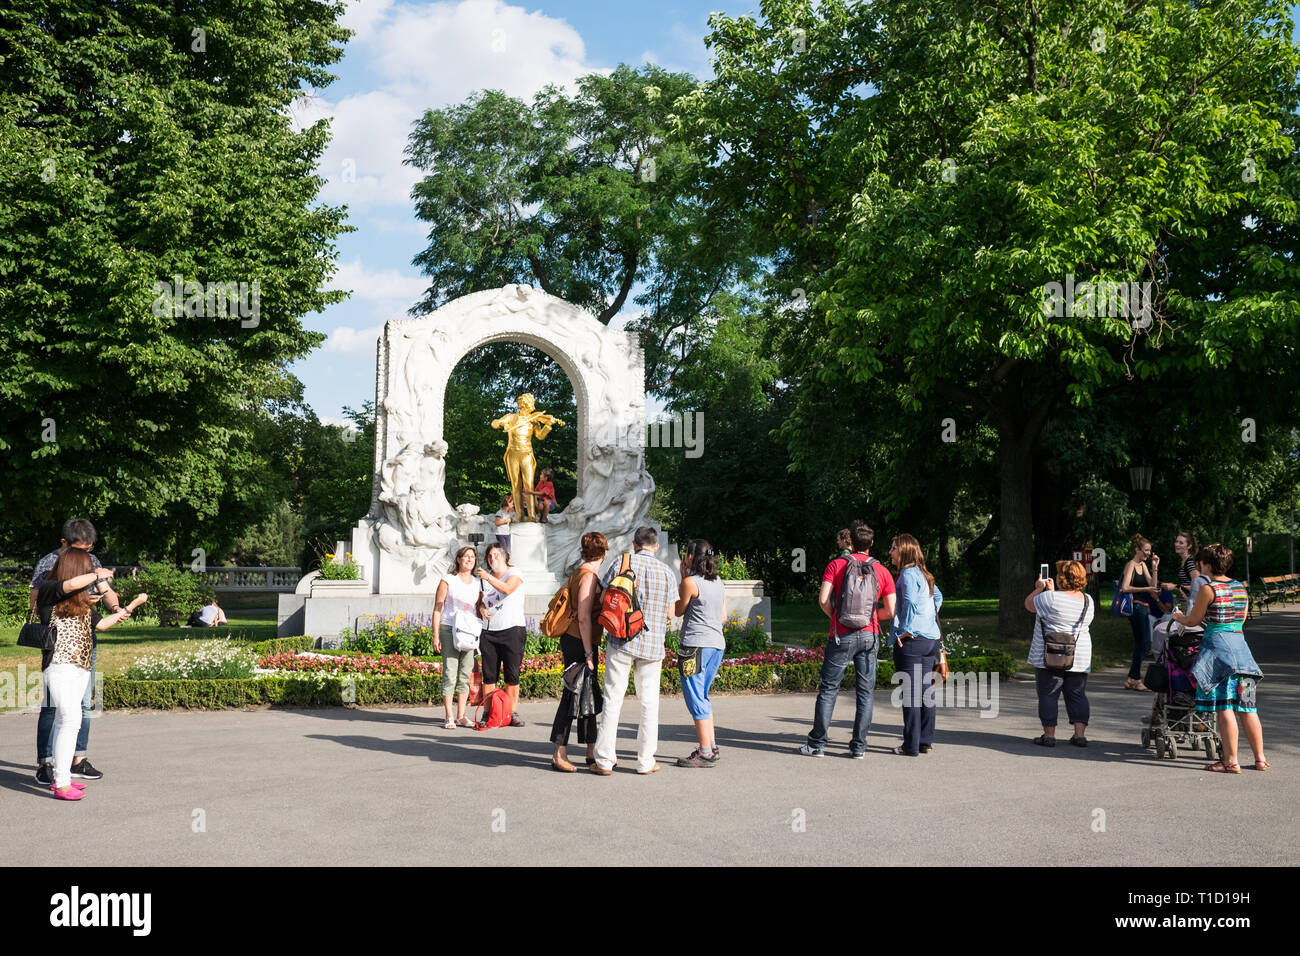 Johann Strauß II Monument in Stadtpark, Vienna with tourists taking photos on a sunny summer day. Stock Photo